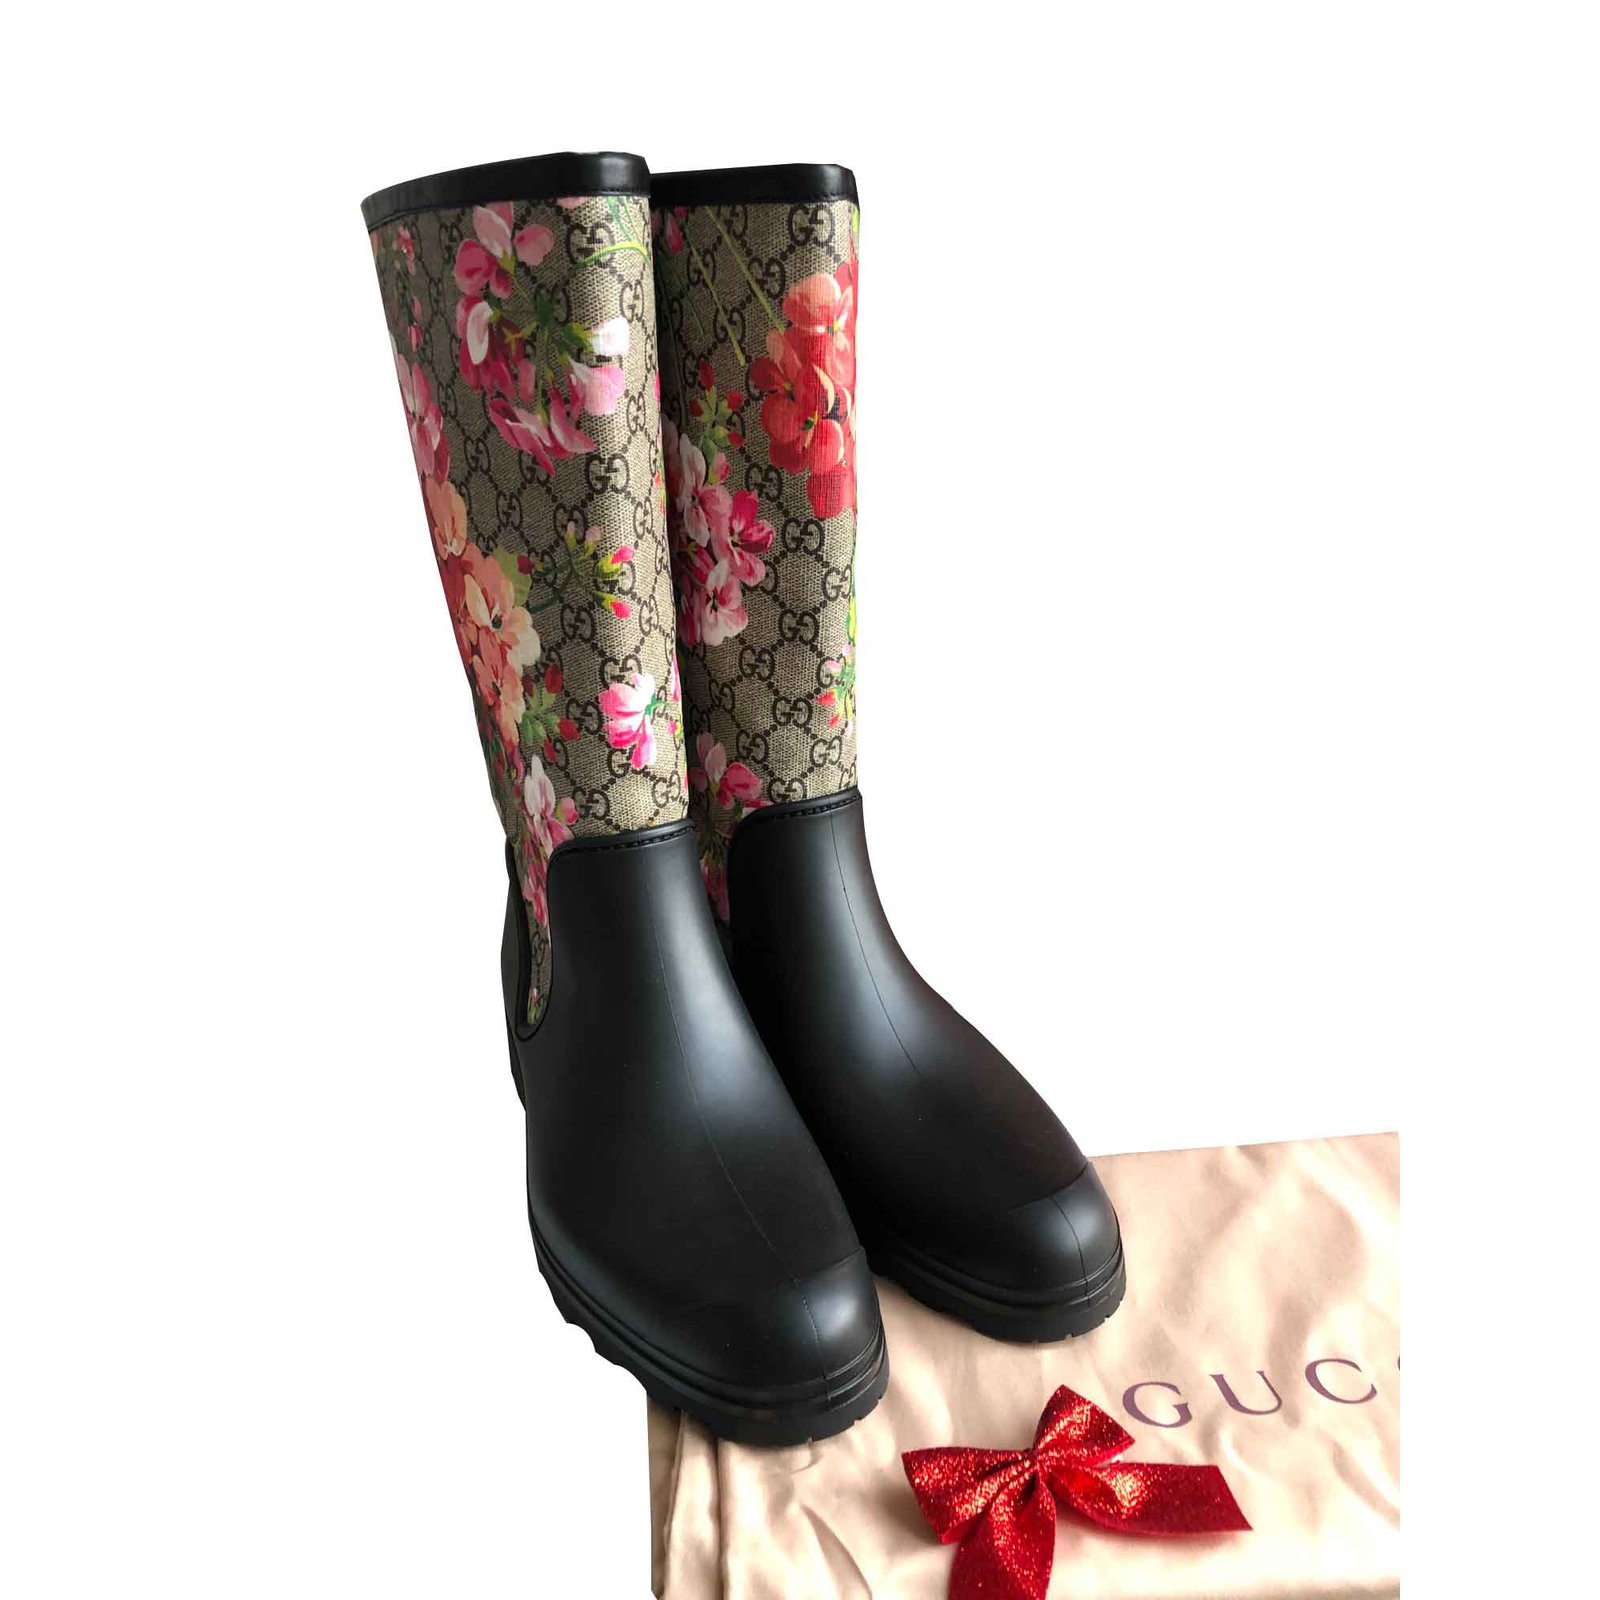 Gucci Floral blossom boots Boots Rubber 